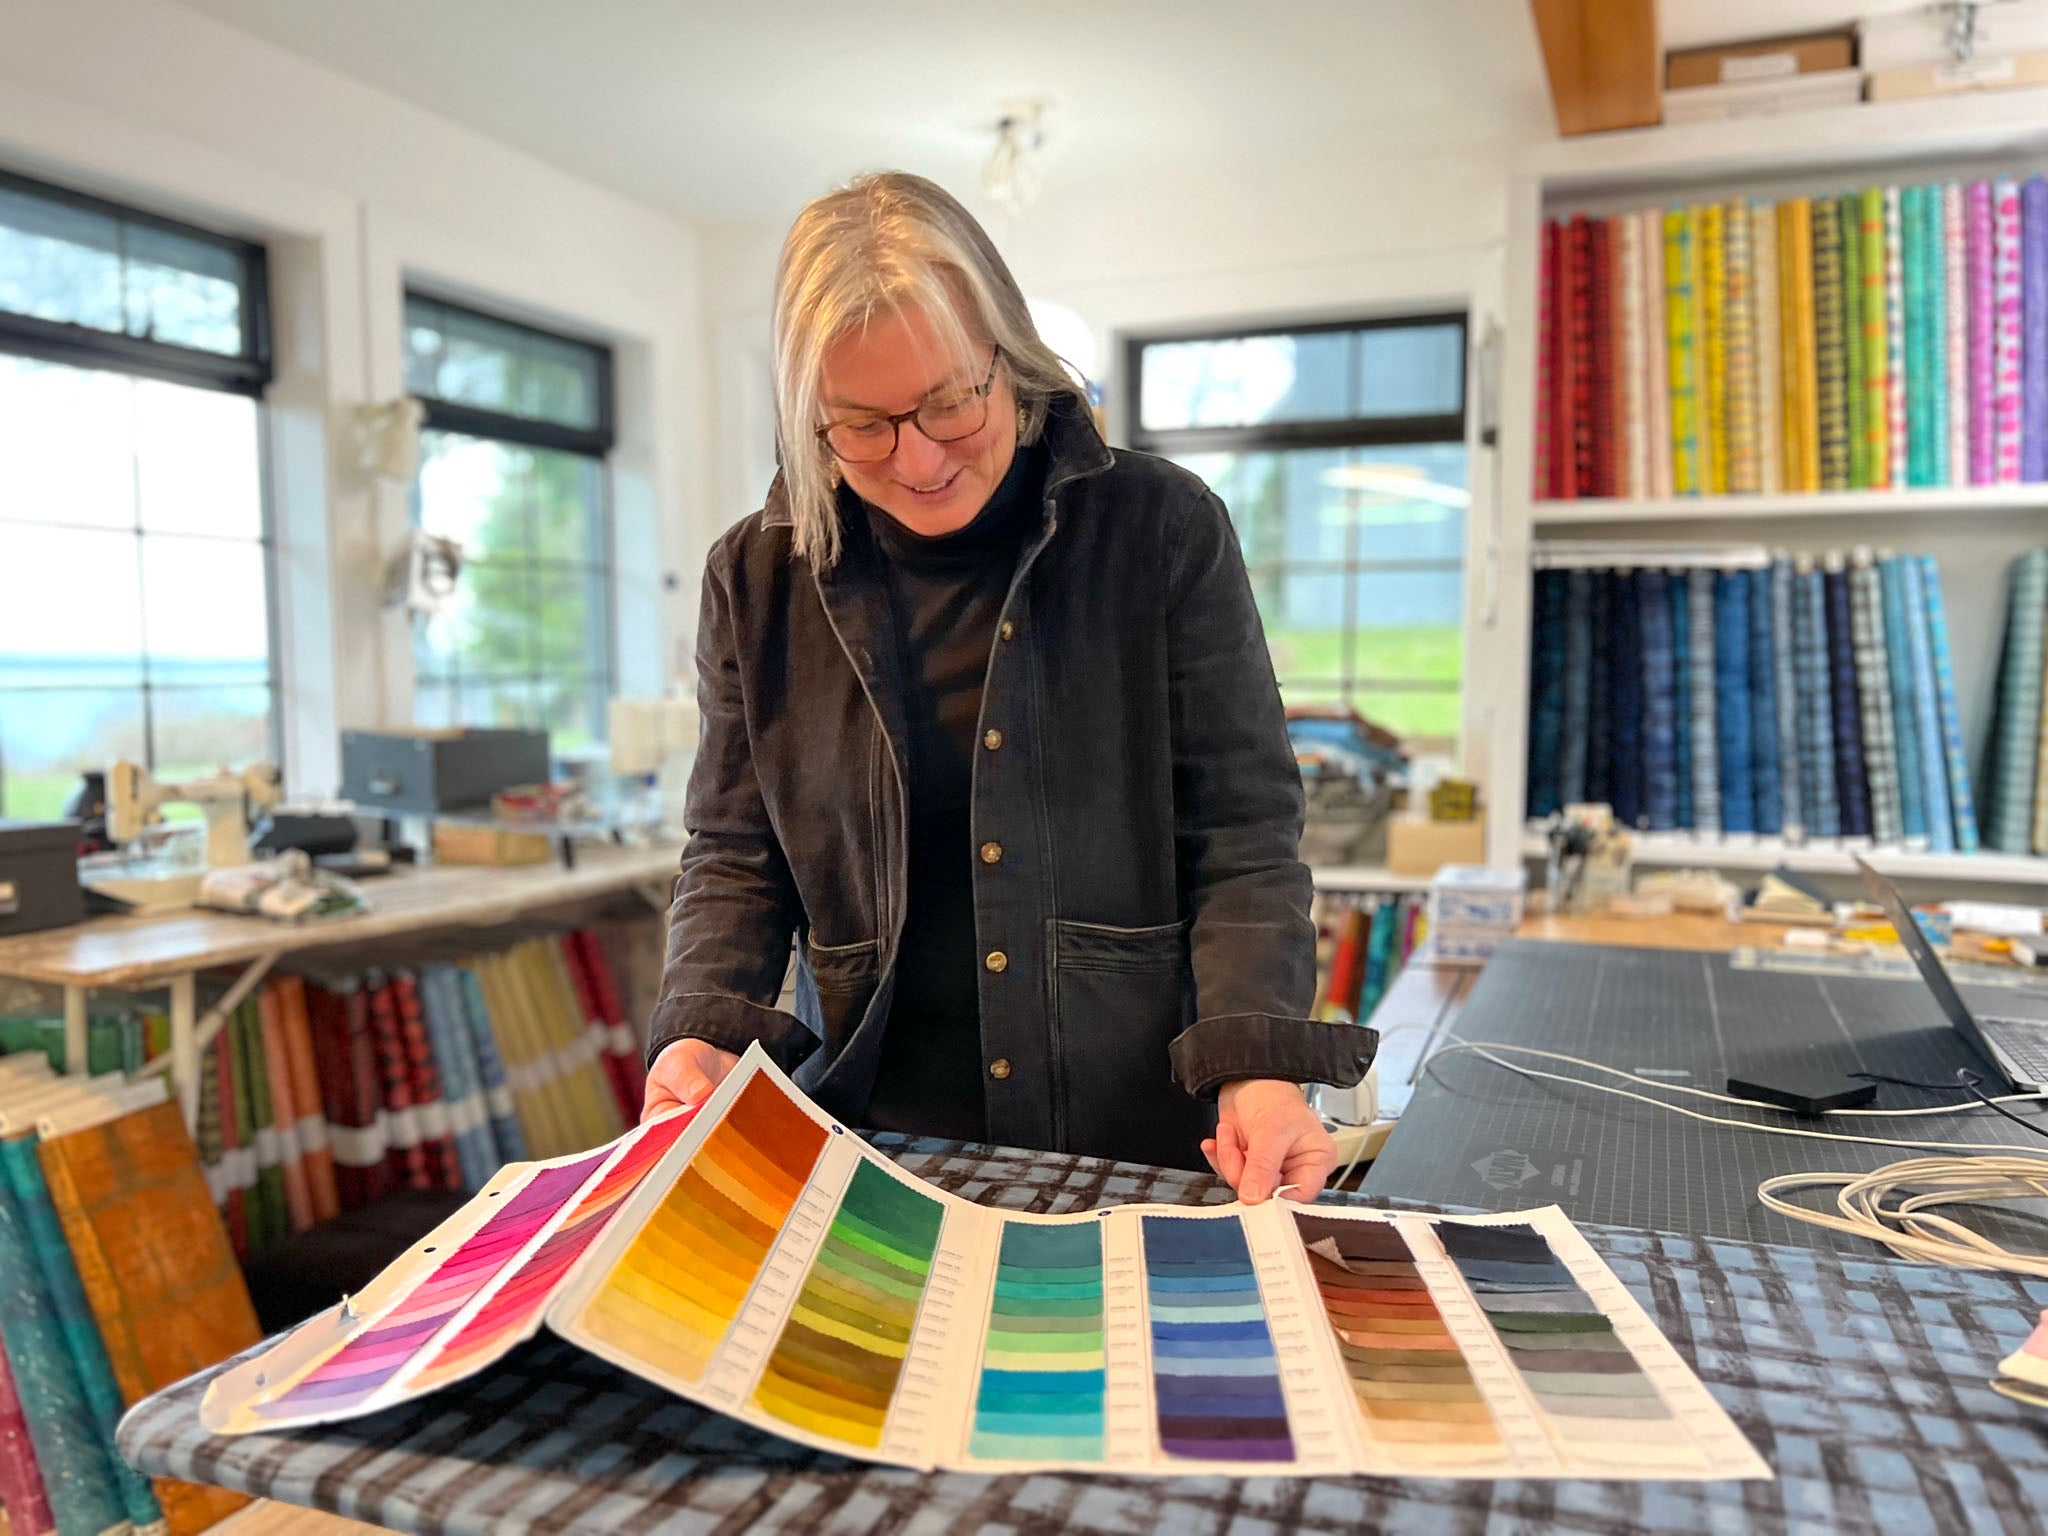 Fabric designer Marcia Derse with her Palette Collection